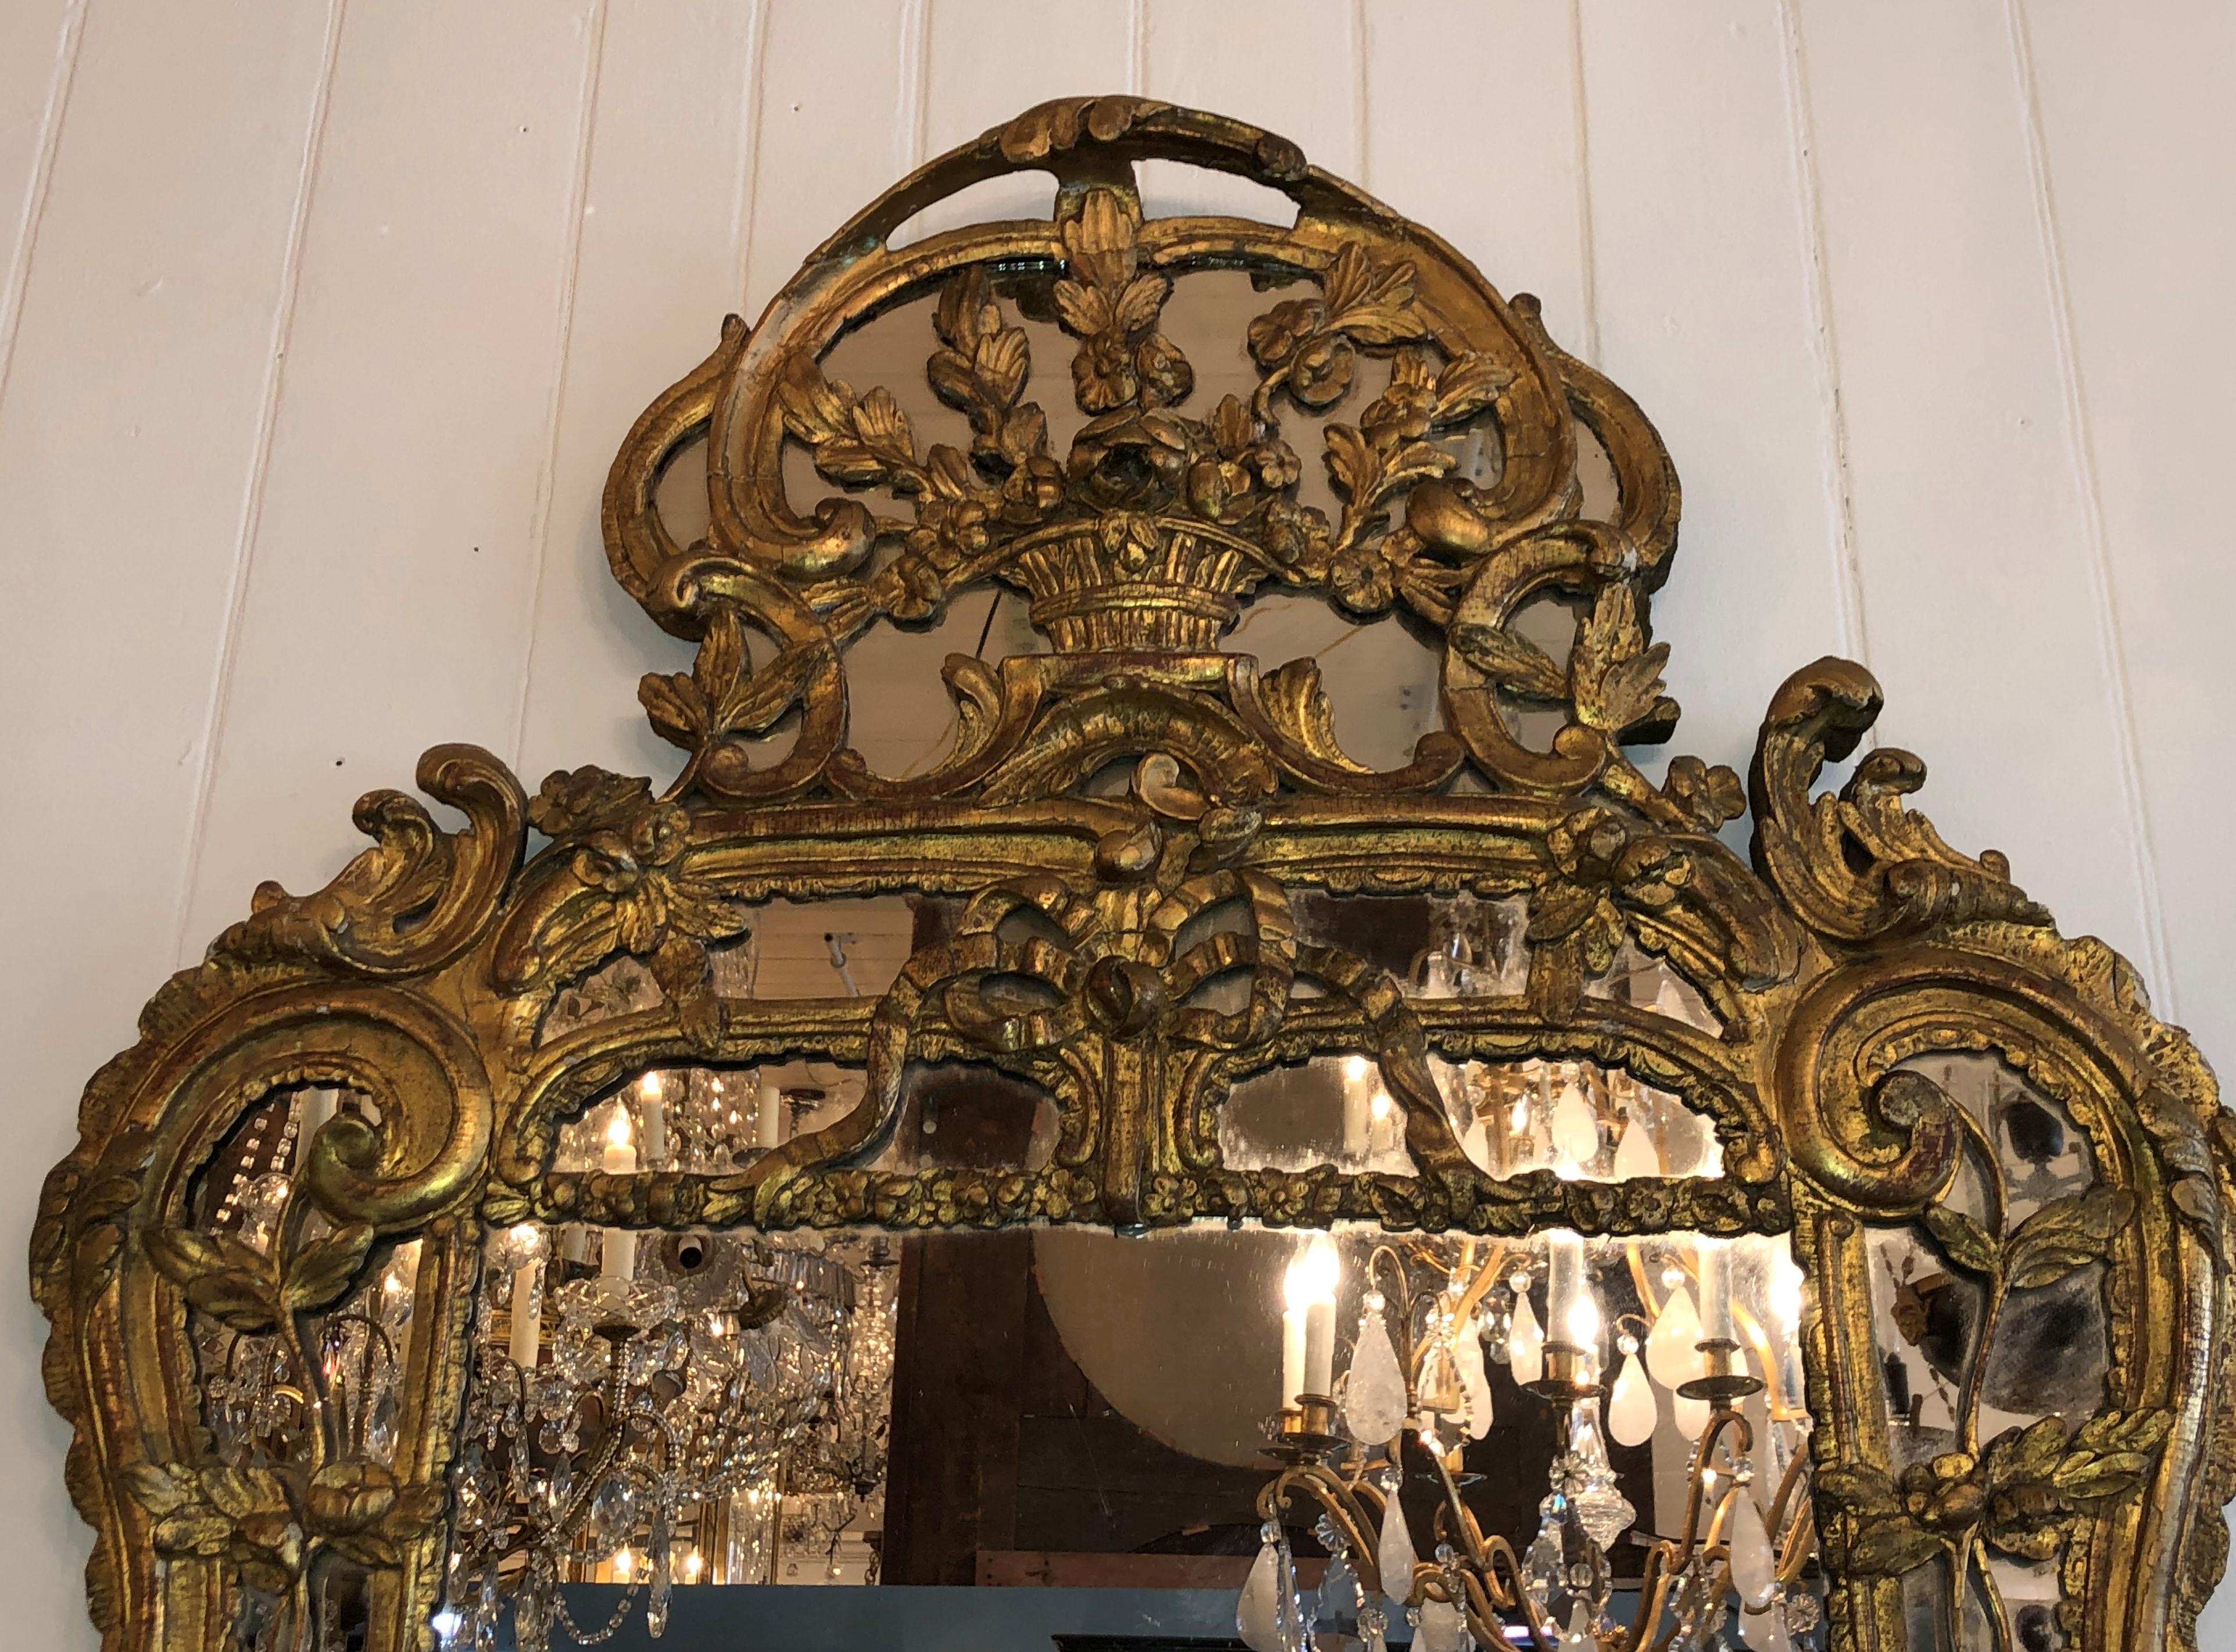 This elegant 18th century Régence looking glass has carved giltwood with mirrored borders, circa 1715-1730. The carved frame has floral and scrolling elements laid over the mirrored borders and crest. The pediment has a carved basket framed by